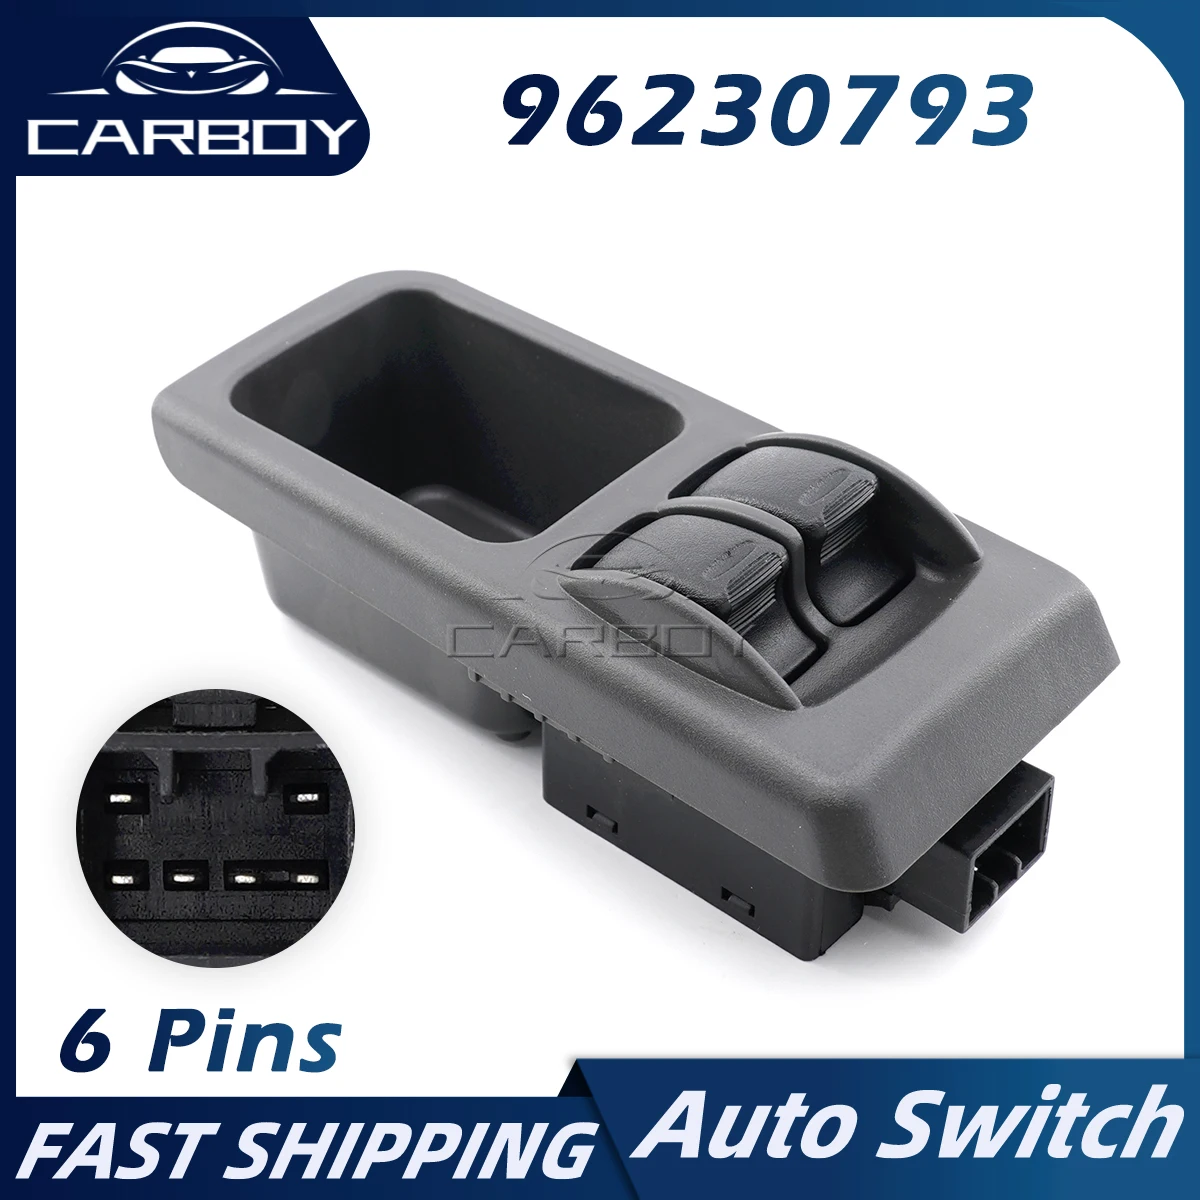 

96230793 Front Left Window Lifter Control Switch Button For Daewoo Lanos 6 Pins 2 Button